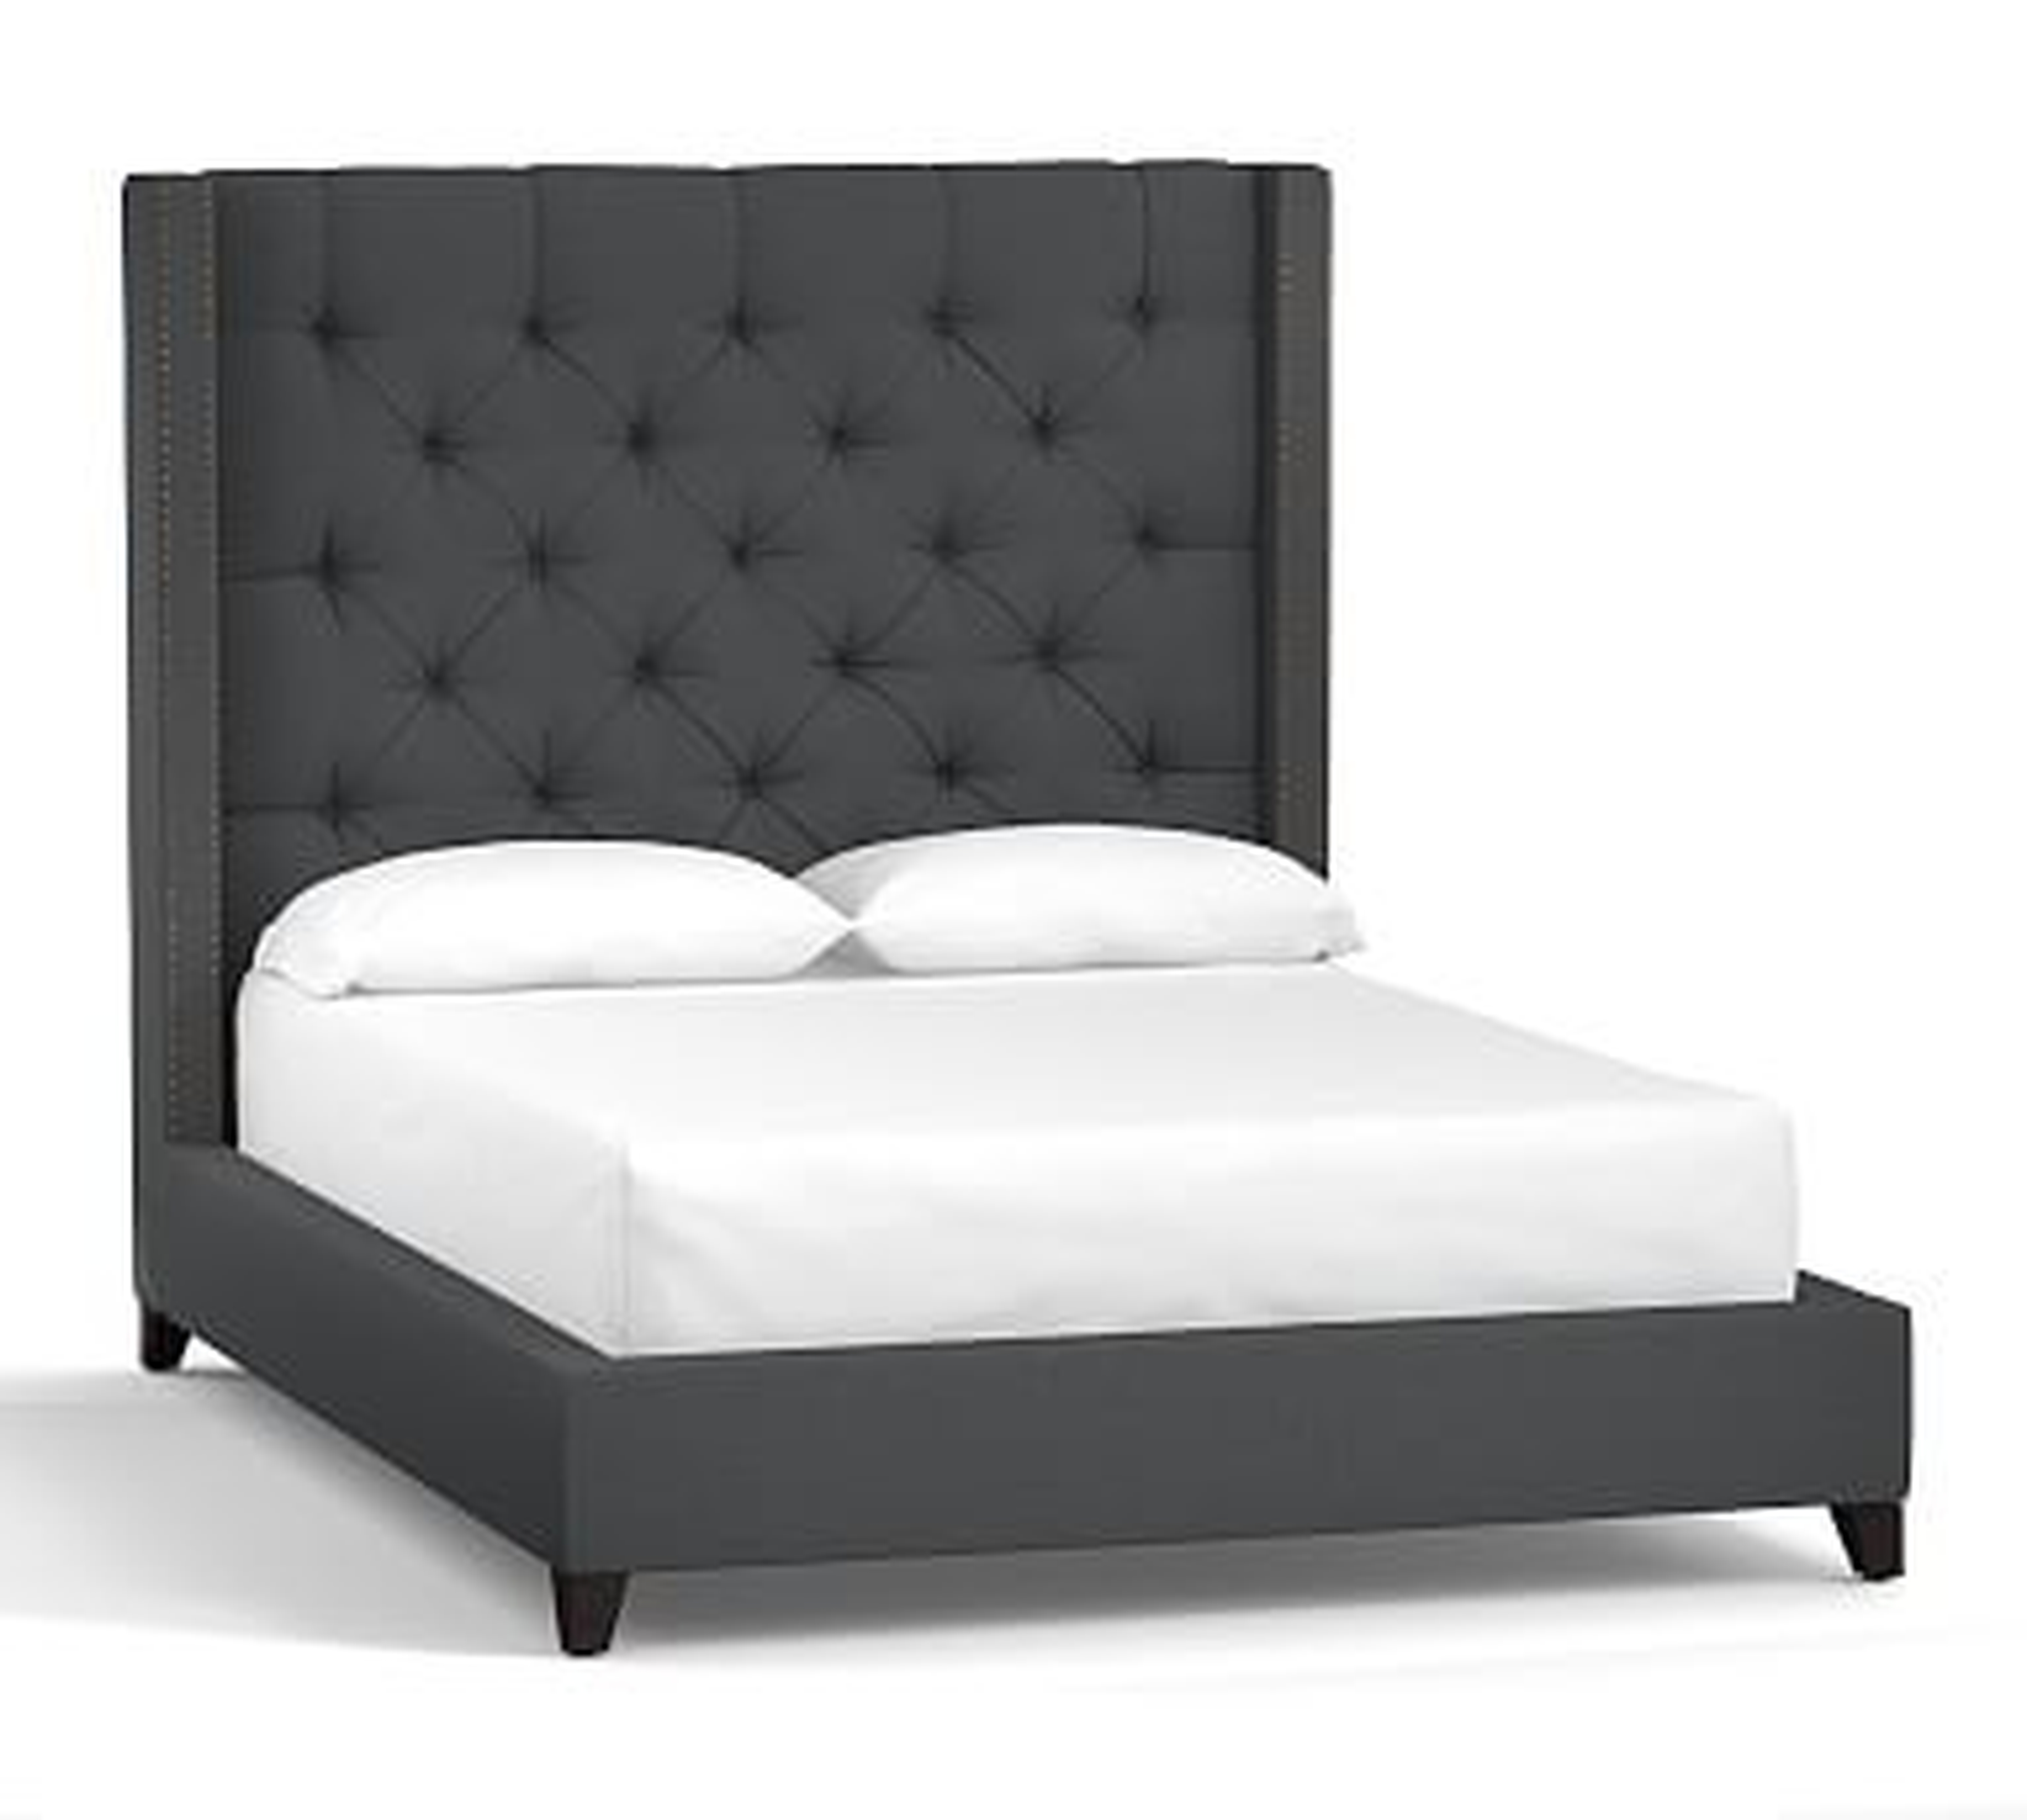 Harper Tufted Upholstered Bed with Bronze Nailheads, King, Tall Headboard65"h, Premium Performance Basketweave Charcoal - Pottery Barn